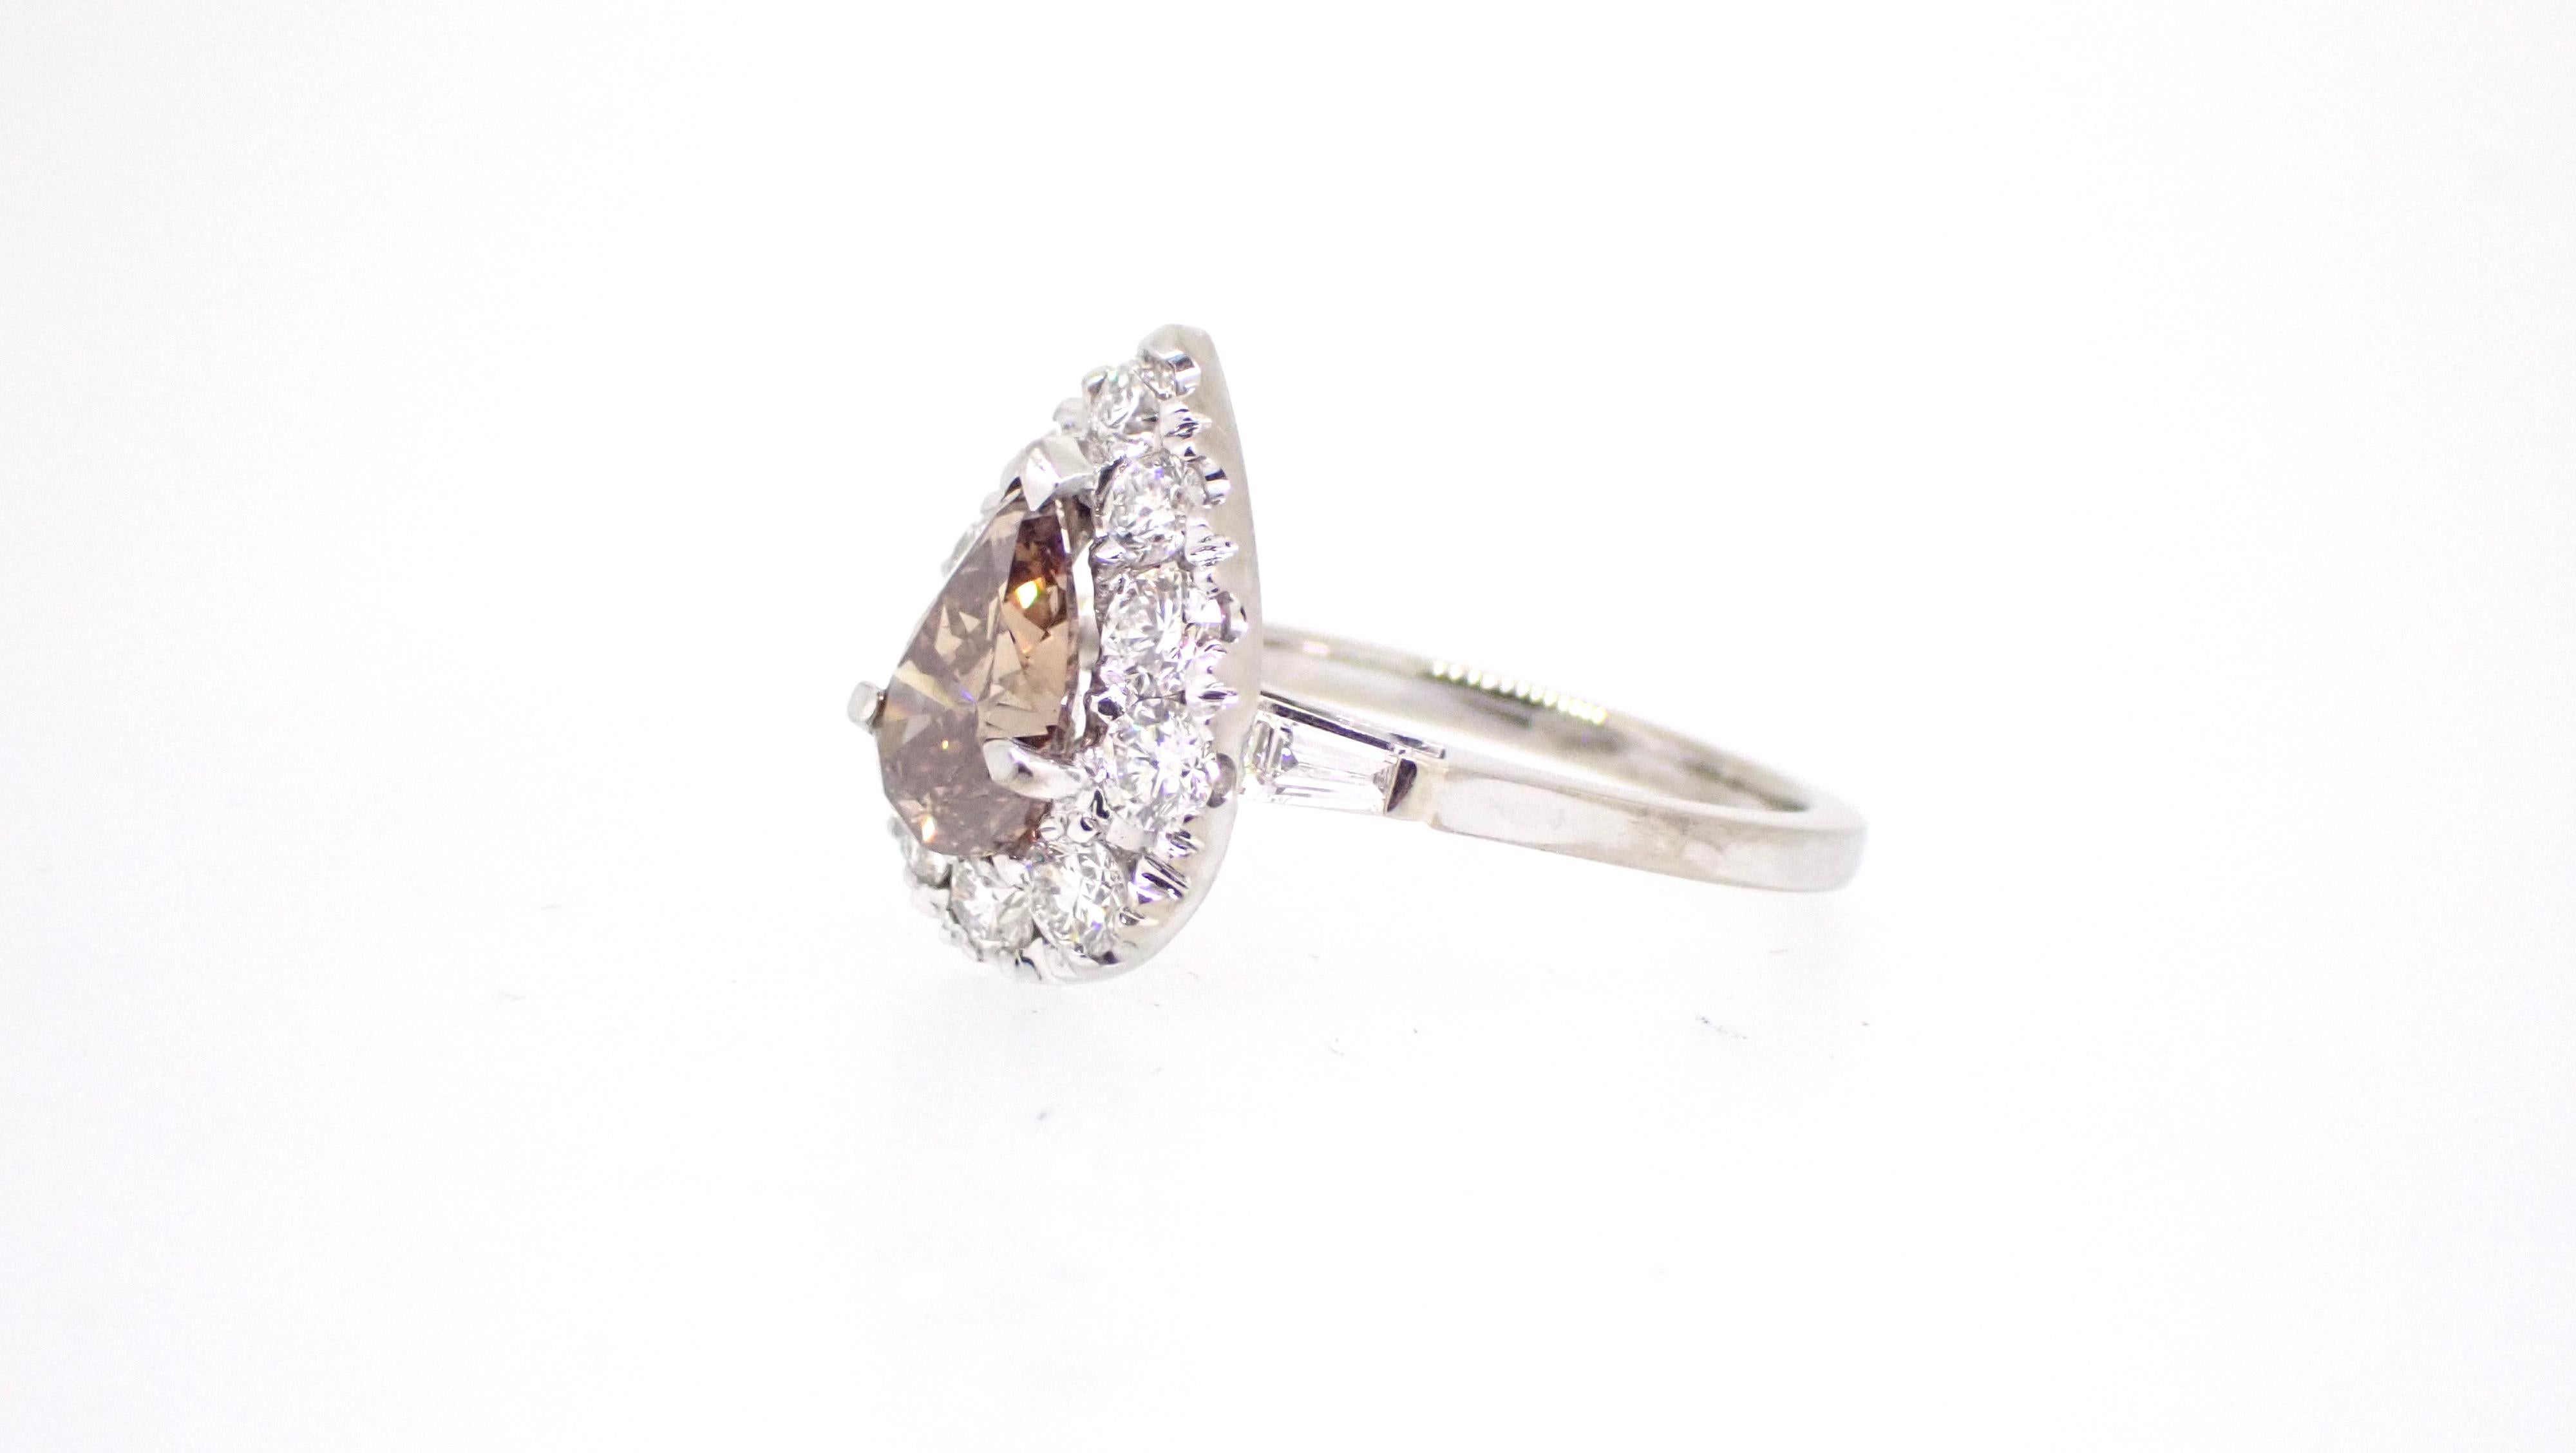 This modern take on this 1.51 Carat Pear Cut Champagne Diamond has all the features of a classic design set to pass the tests of time. 

It has all the ingredients for a 